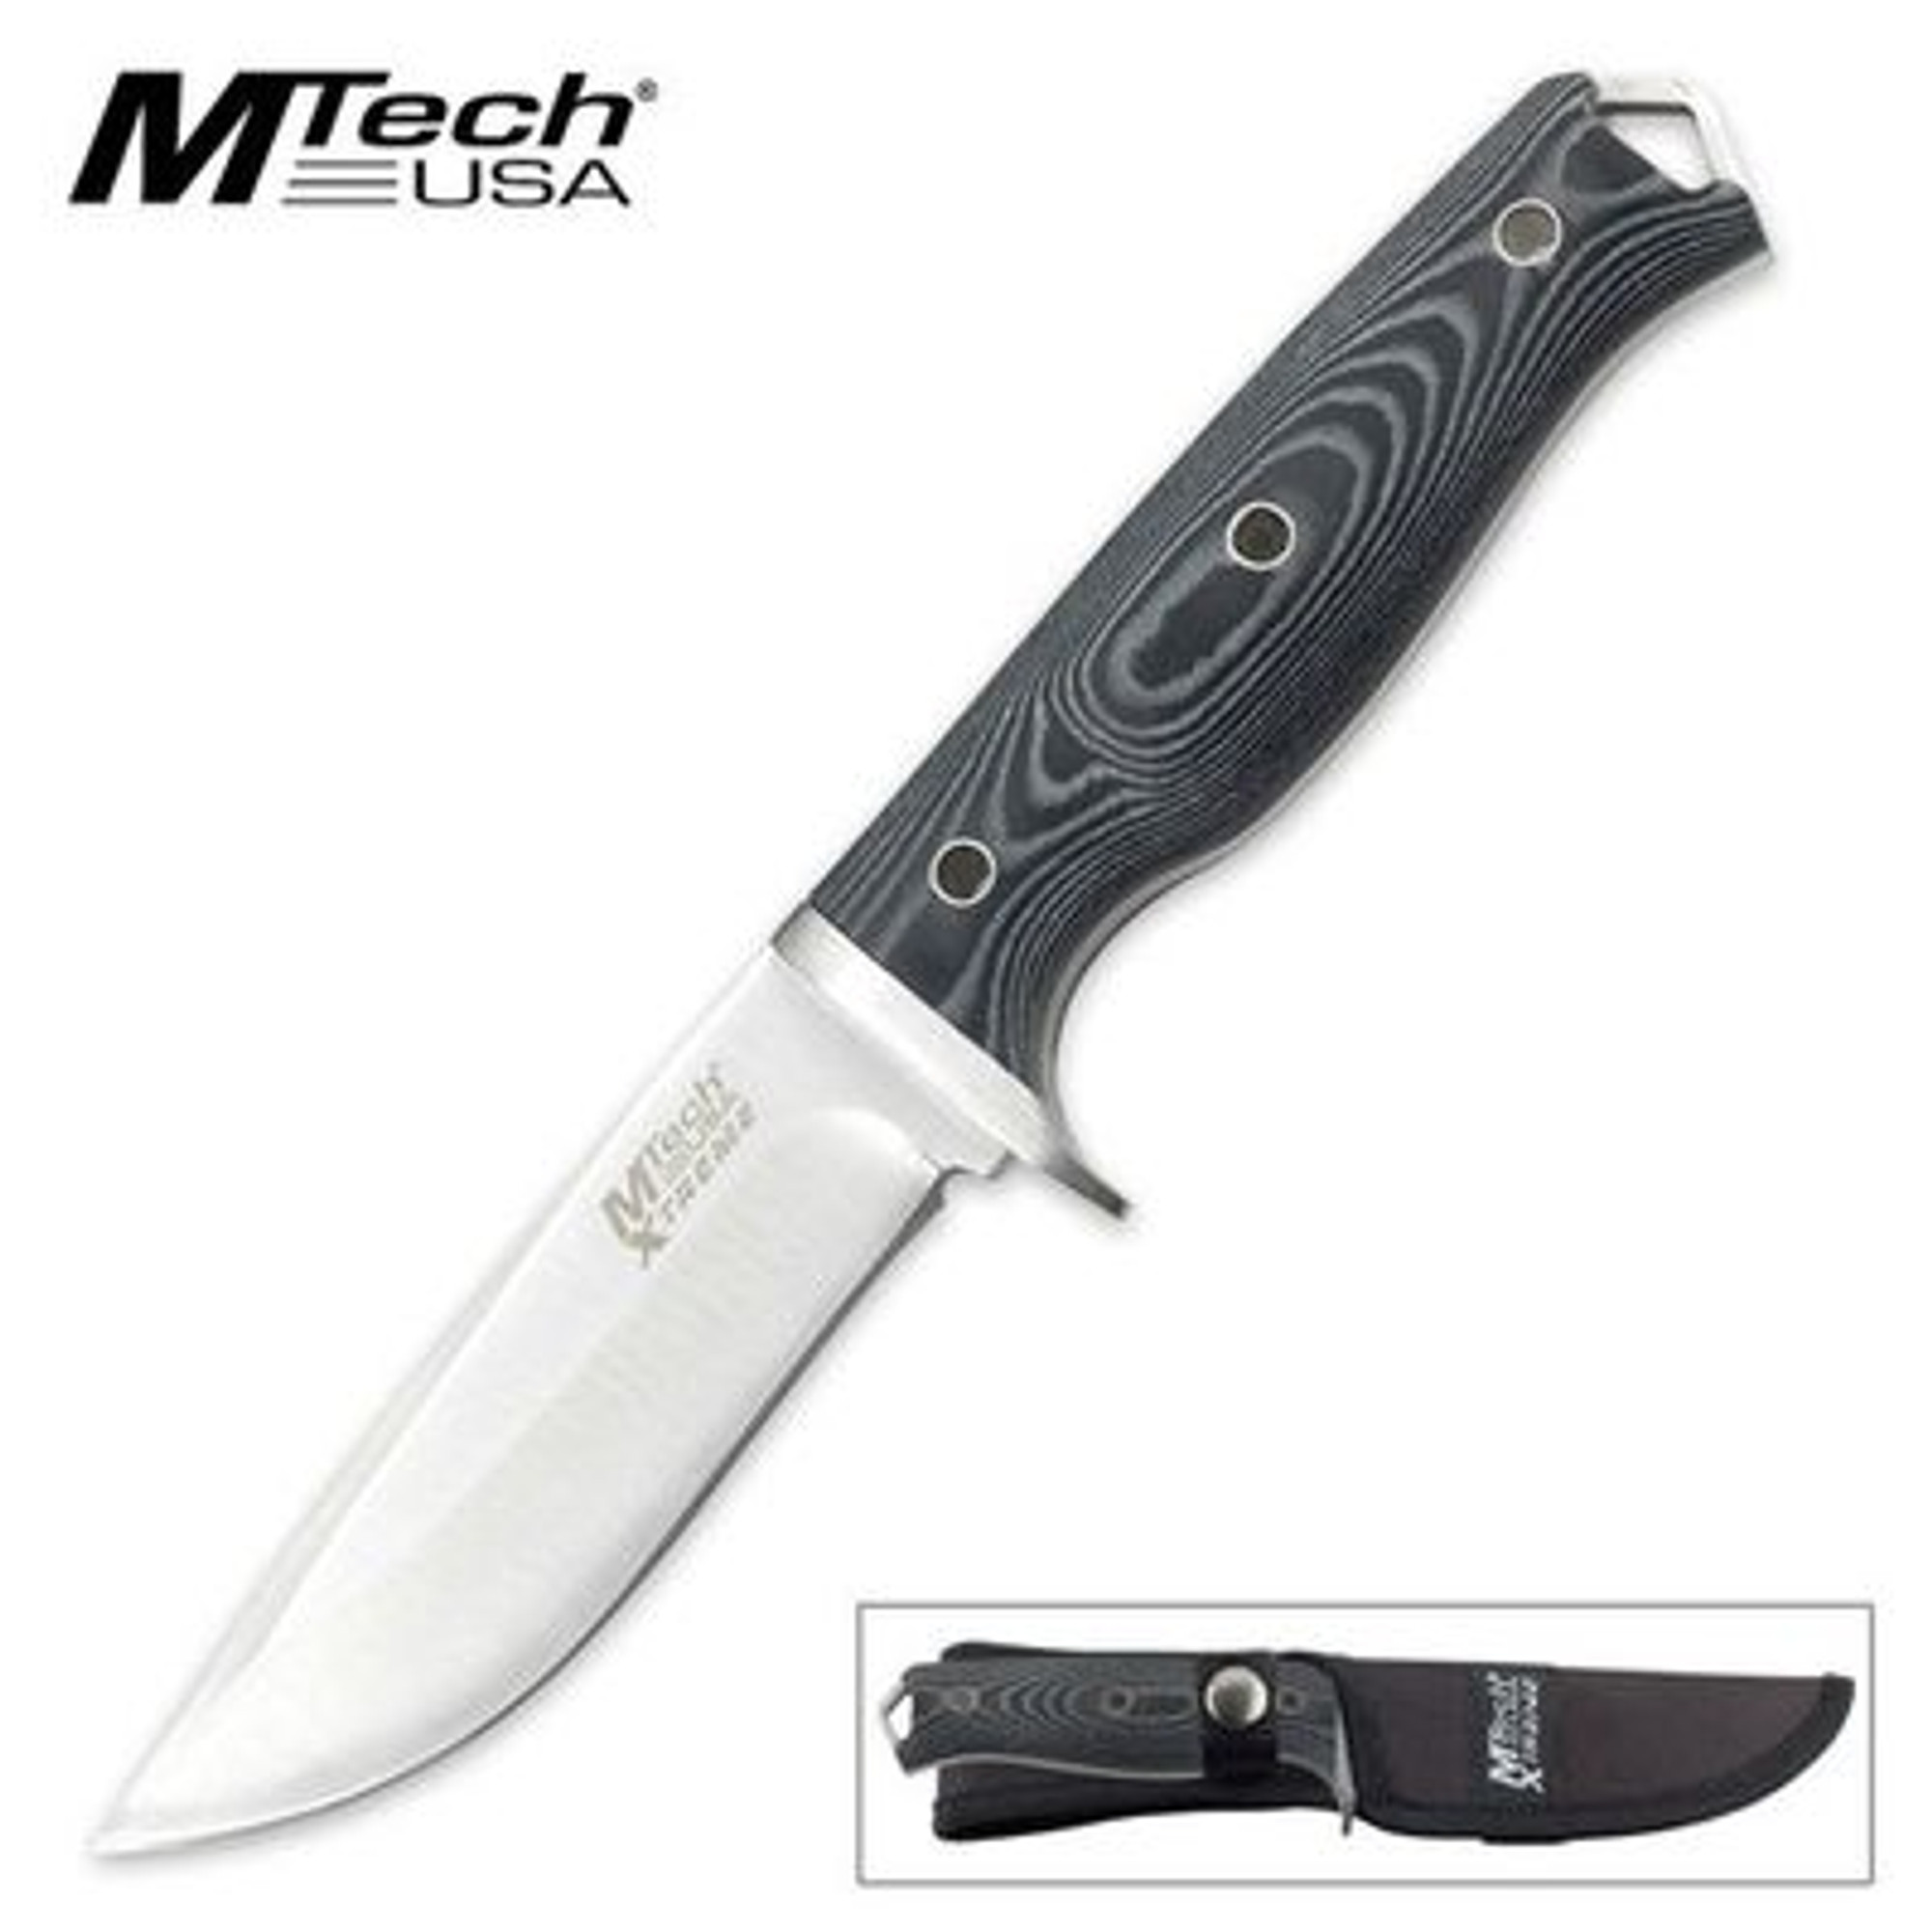 MTech Xtreme 8.5-Inch Fixed Blade Knife With Micarta Handle